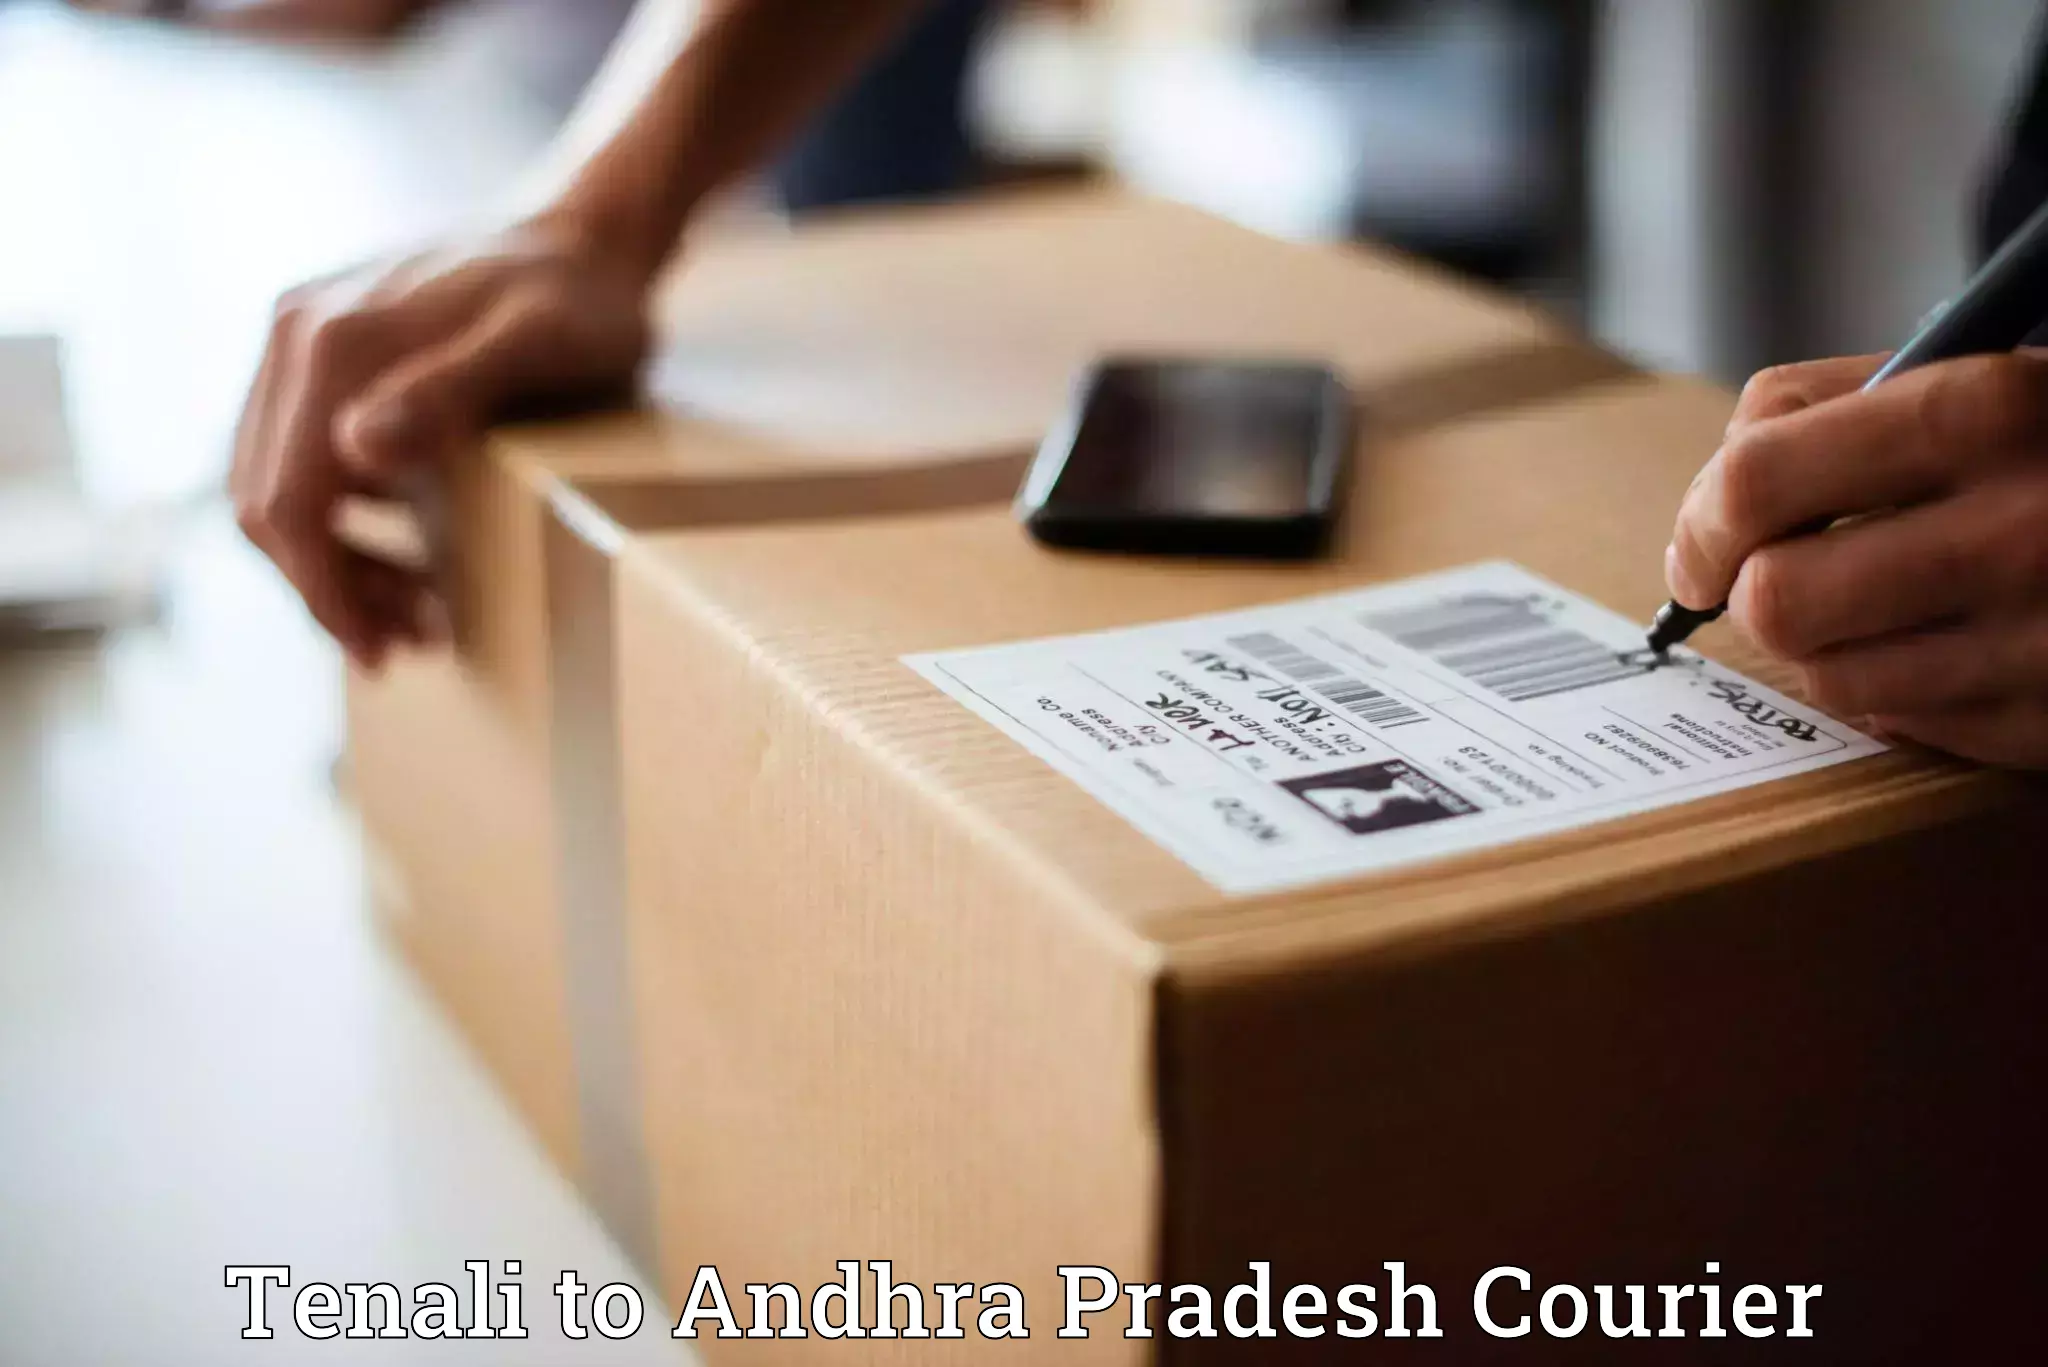 24/7 courier service in Tenali to Rajahmundry